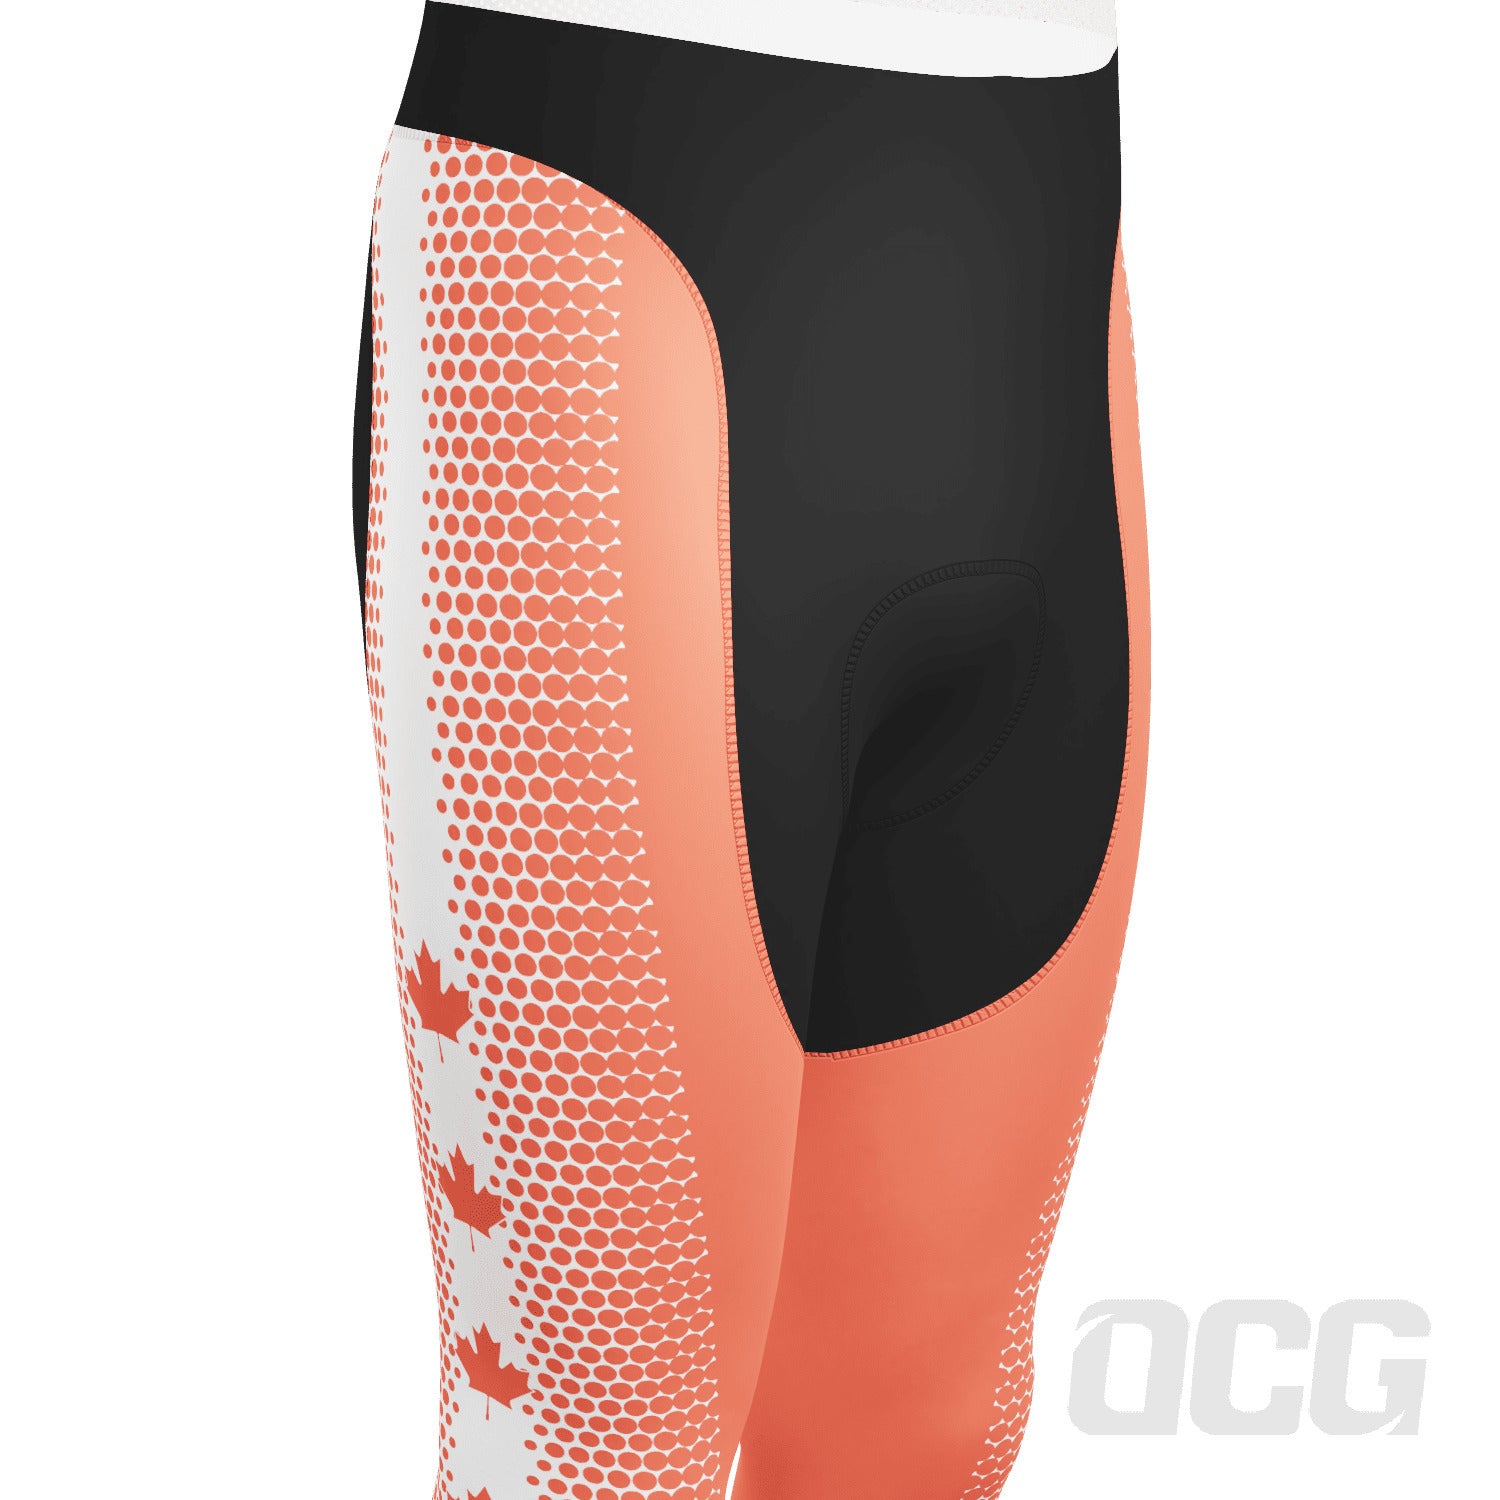 Men's World Countries Team Canada Icon Gel Padded Cycling Bib-Tights